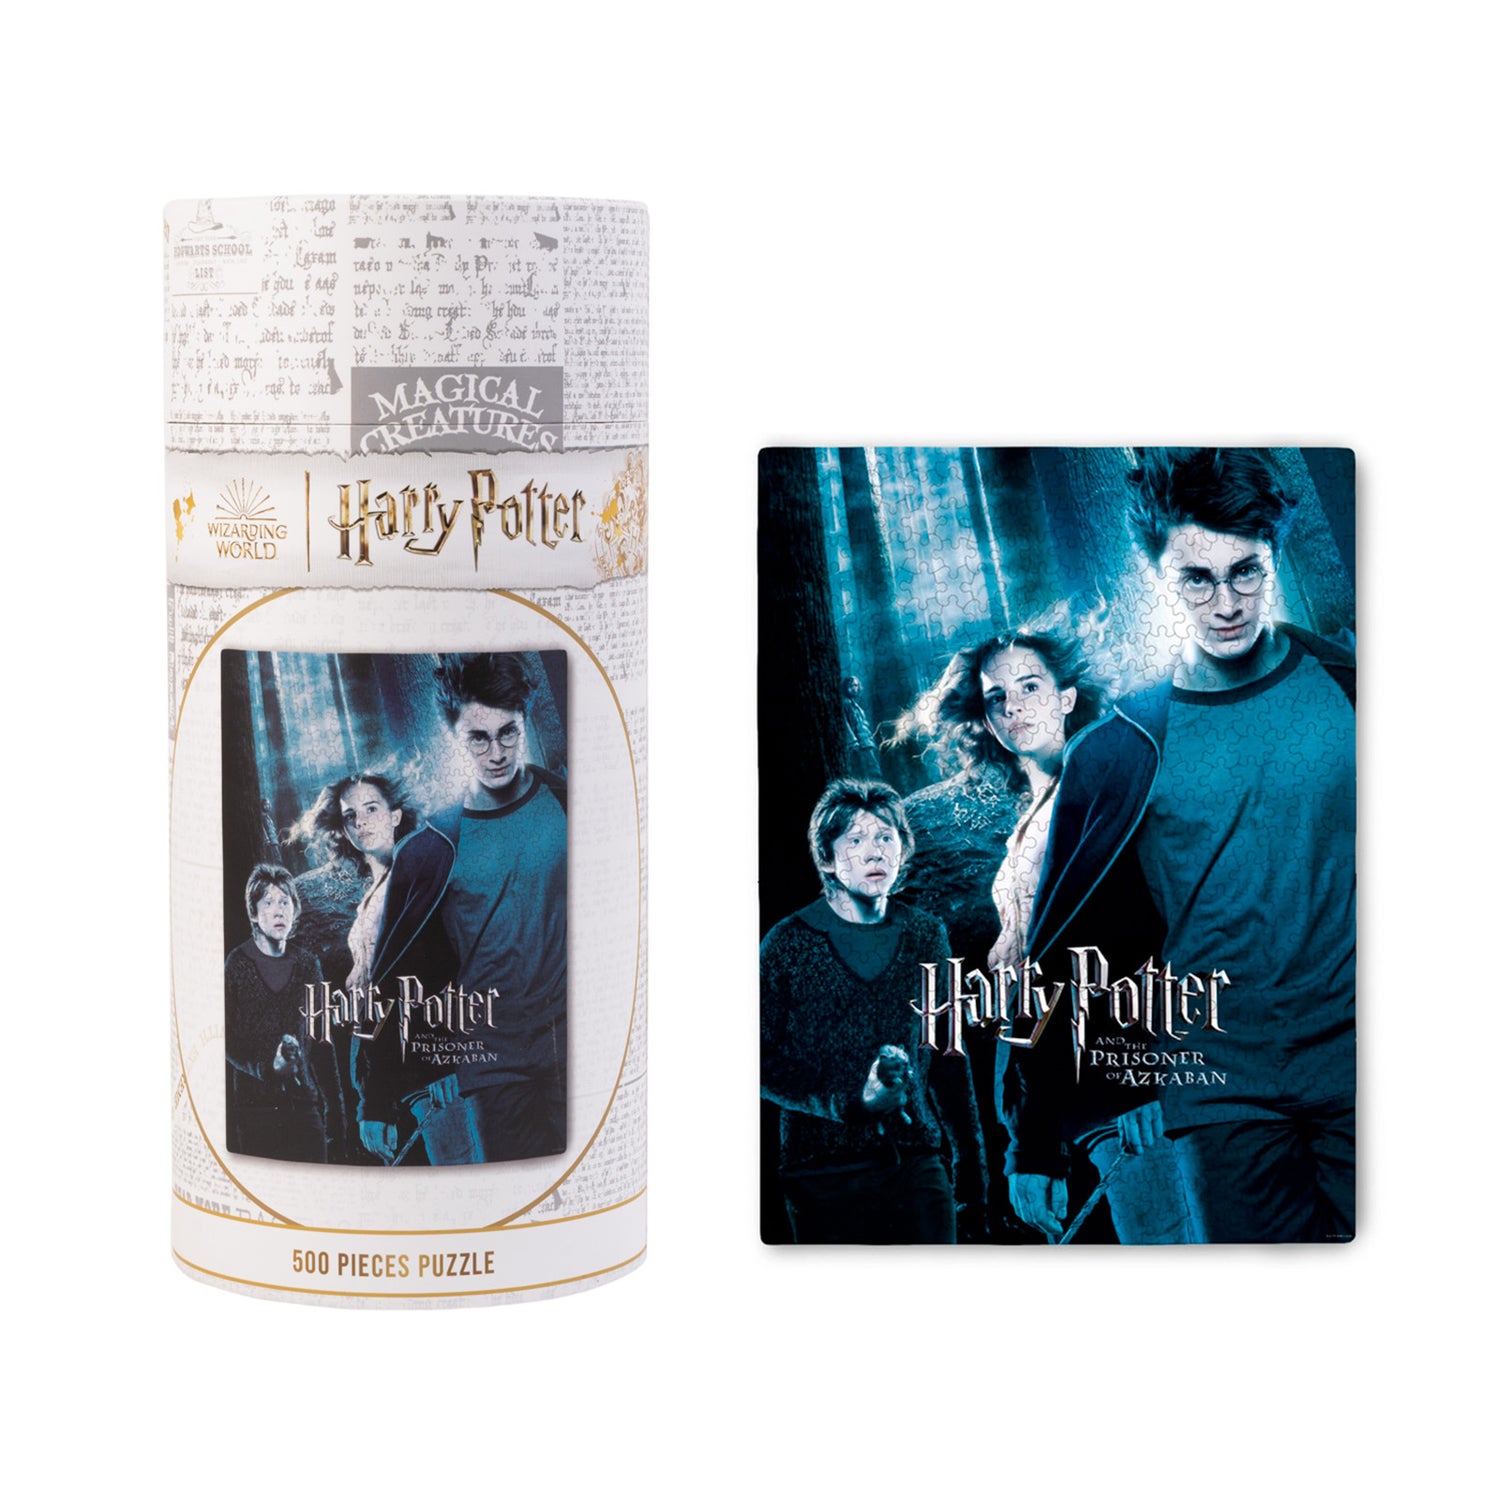 Harry Potter And The Prisoner Of Azkaban 500 Pieces Puzzle